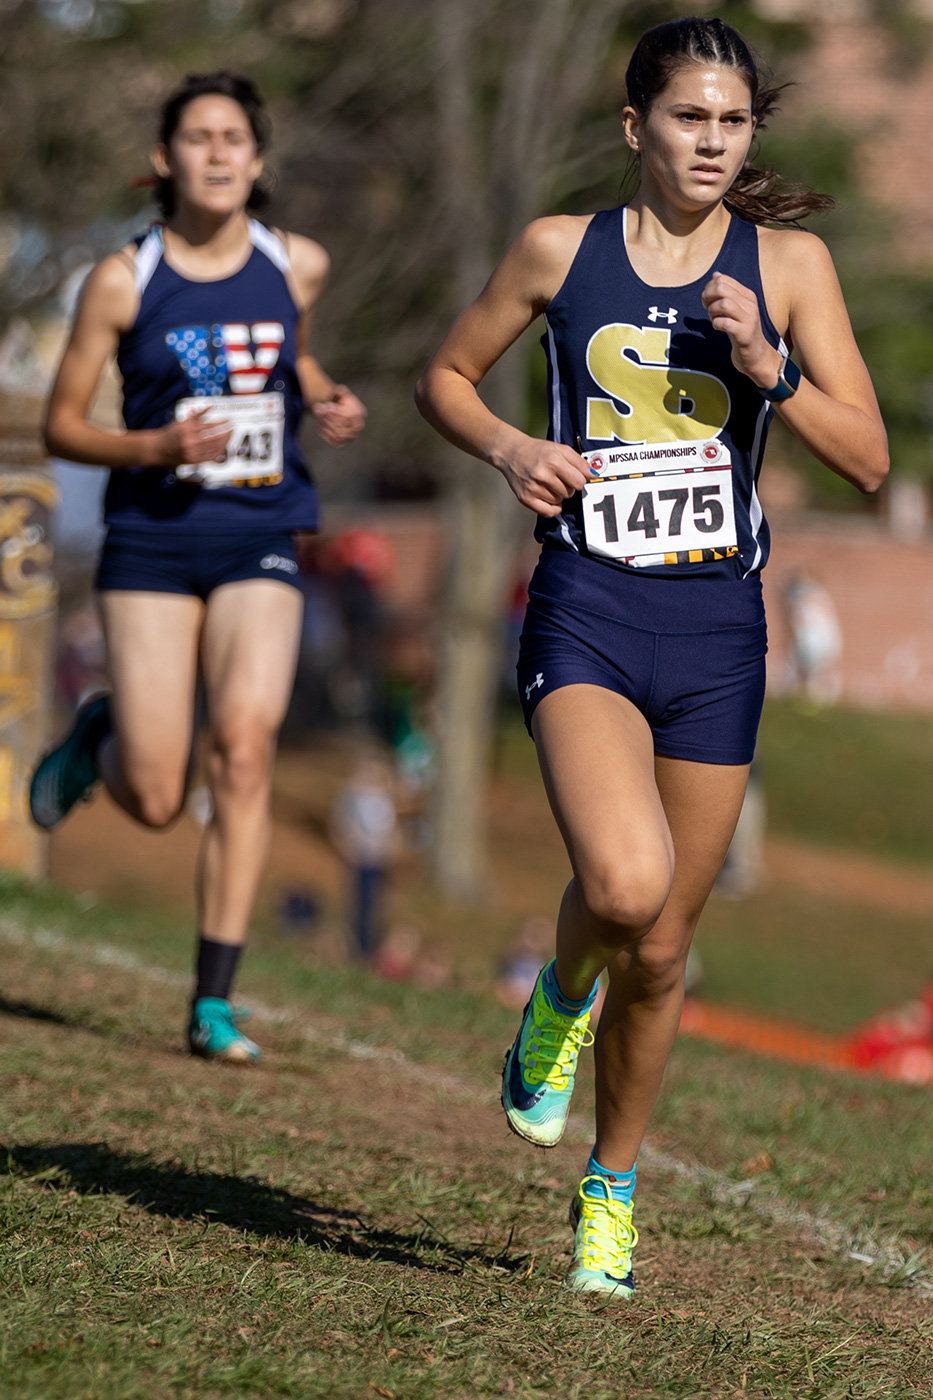 The Severna Park girls overcame the odds and won their first state title since 2018 on November 12 behind the performances of senior county champion Cameron Glebocki, freshman Kathryn Murphy and sophomore Rebecca Jimeno.